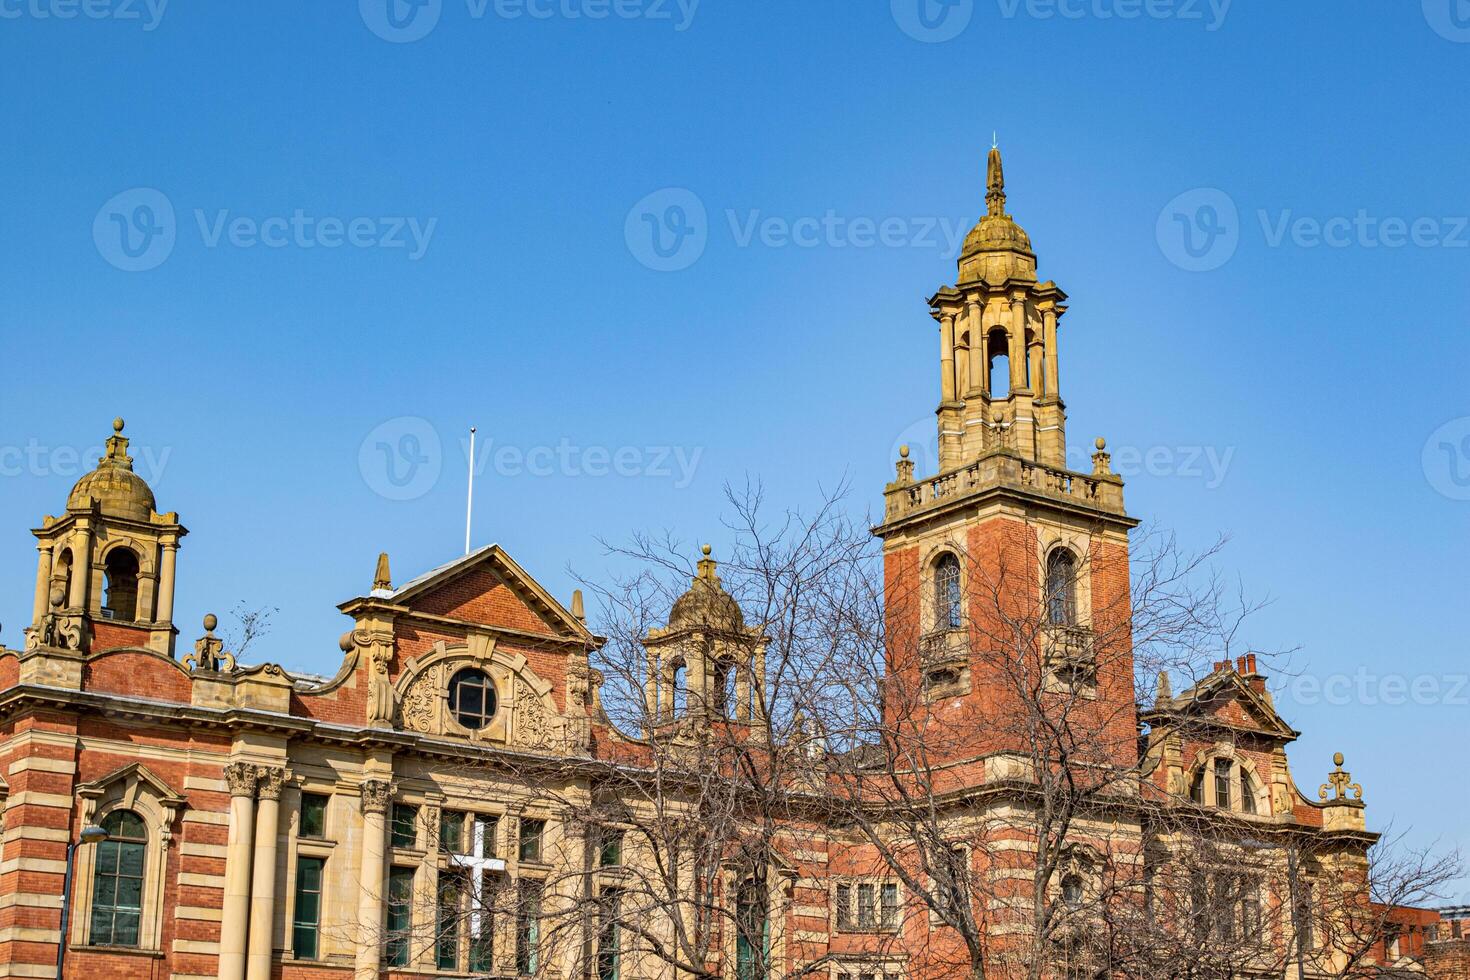 Historic red brick building with clock tower against a clear blue sky in Leeds, England photo